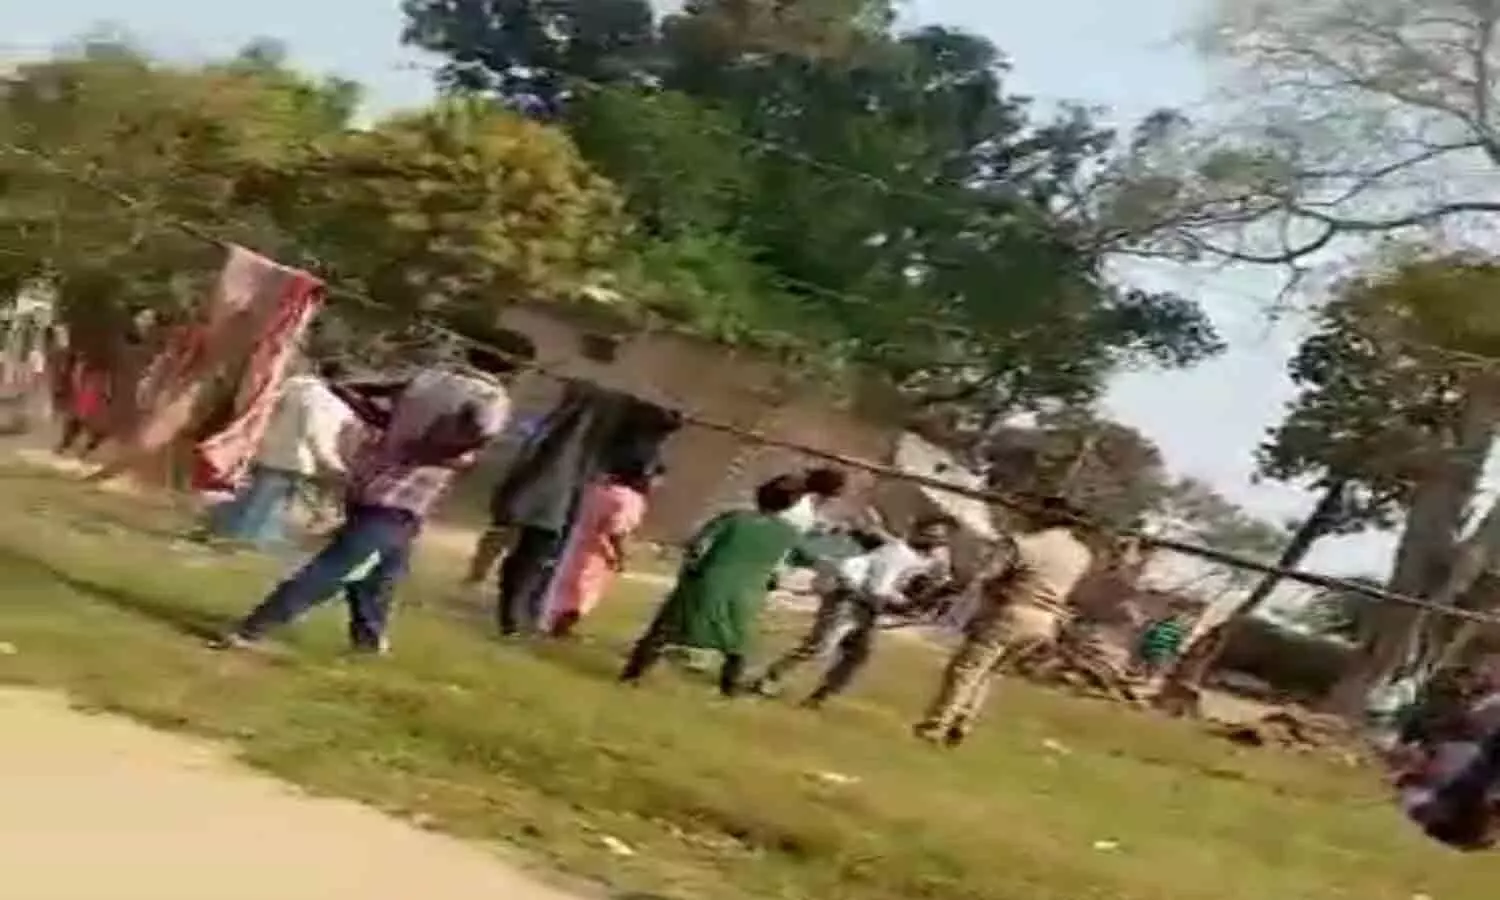 Jaunpur News: Villagers attack on police who went to settle land dispute in Dalit Basti, one Diwan seriously injured